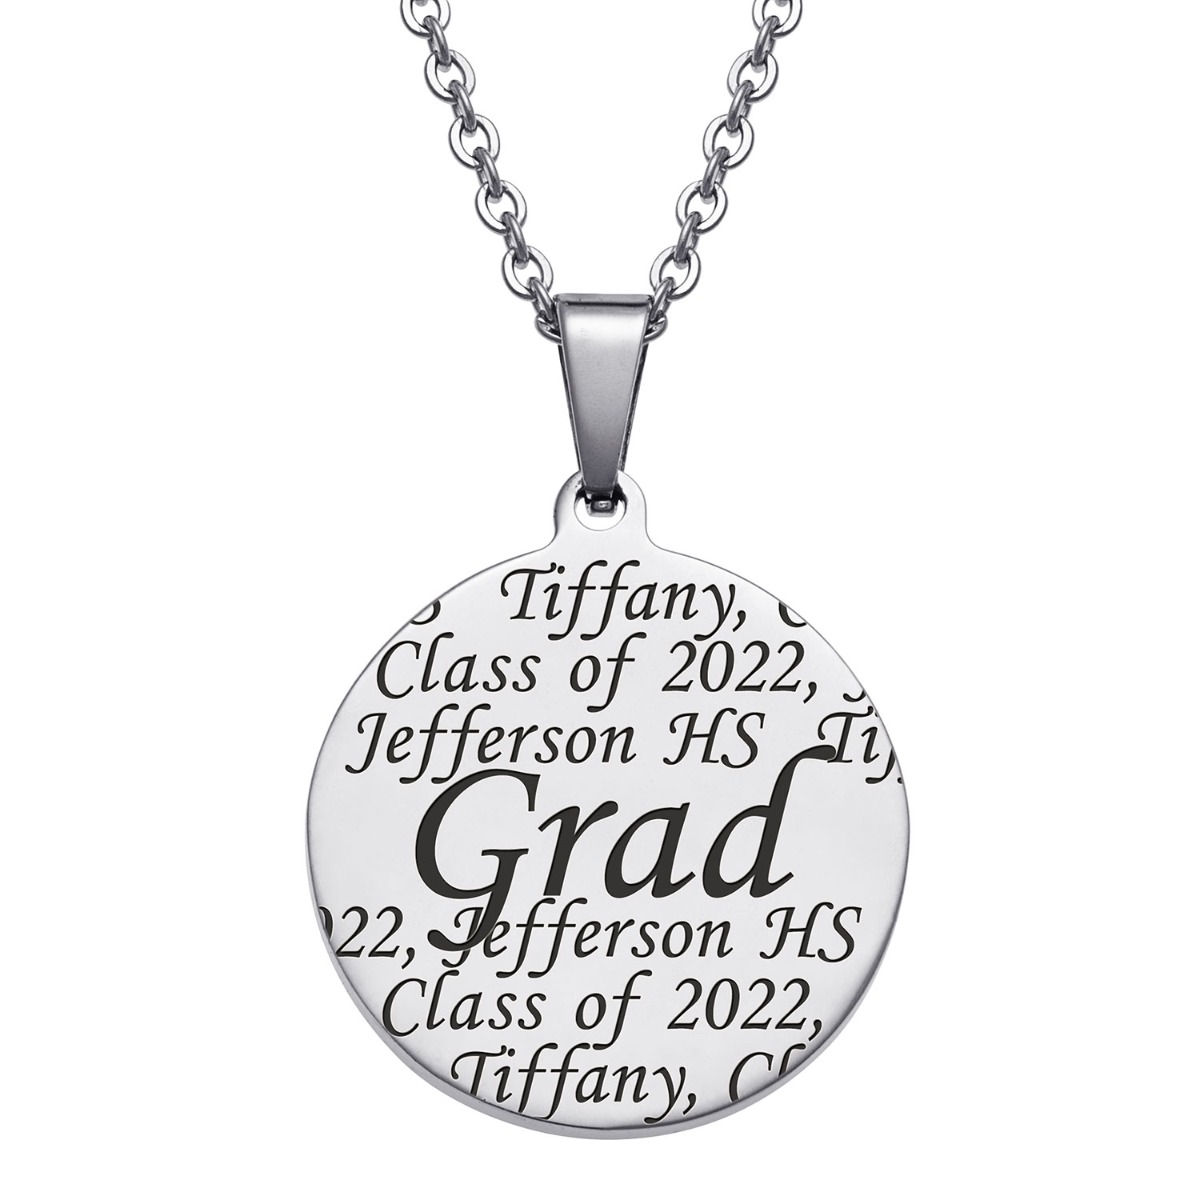 Personalized Everscribe Engraved Stainless Steel Graduation Necklace